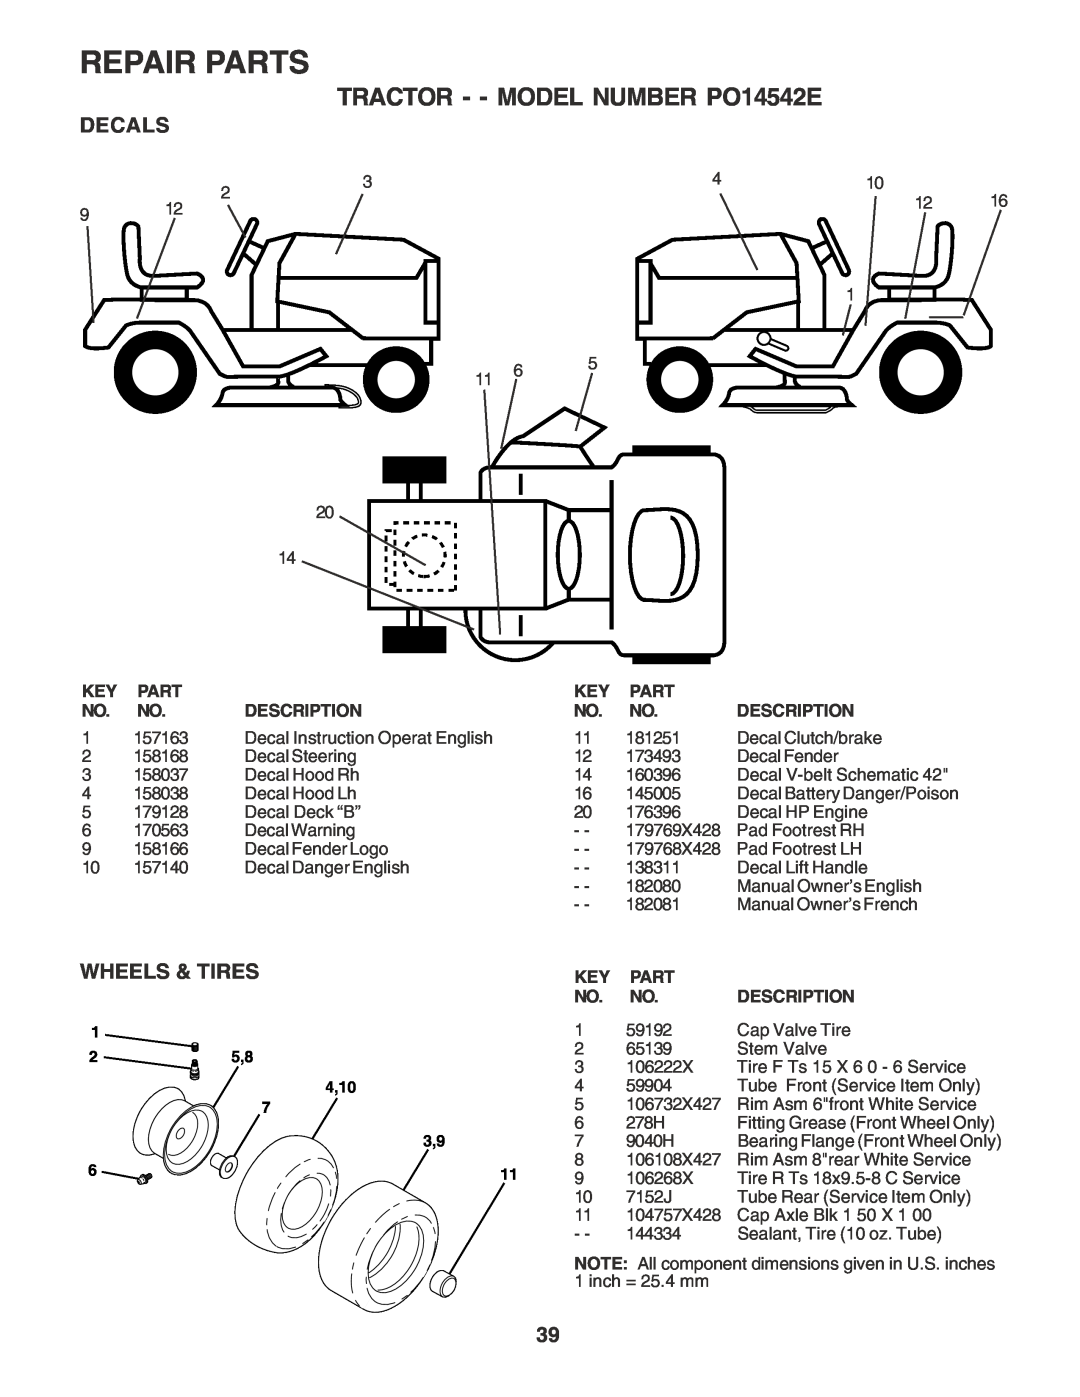 Poulan manual Decals, Wheels & Tires, Repair Parts, TRACTOR - - MODEL NUMBER PO14542E 